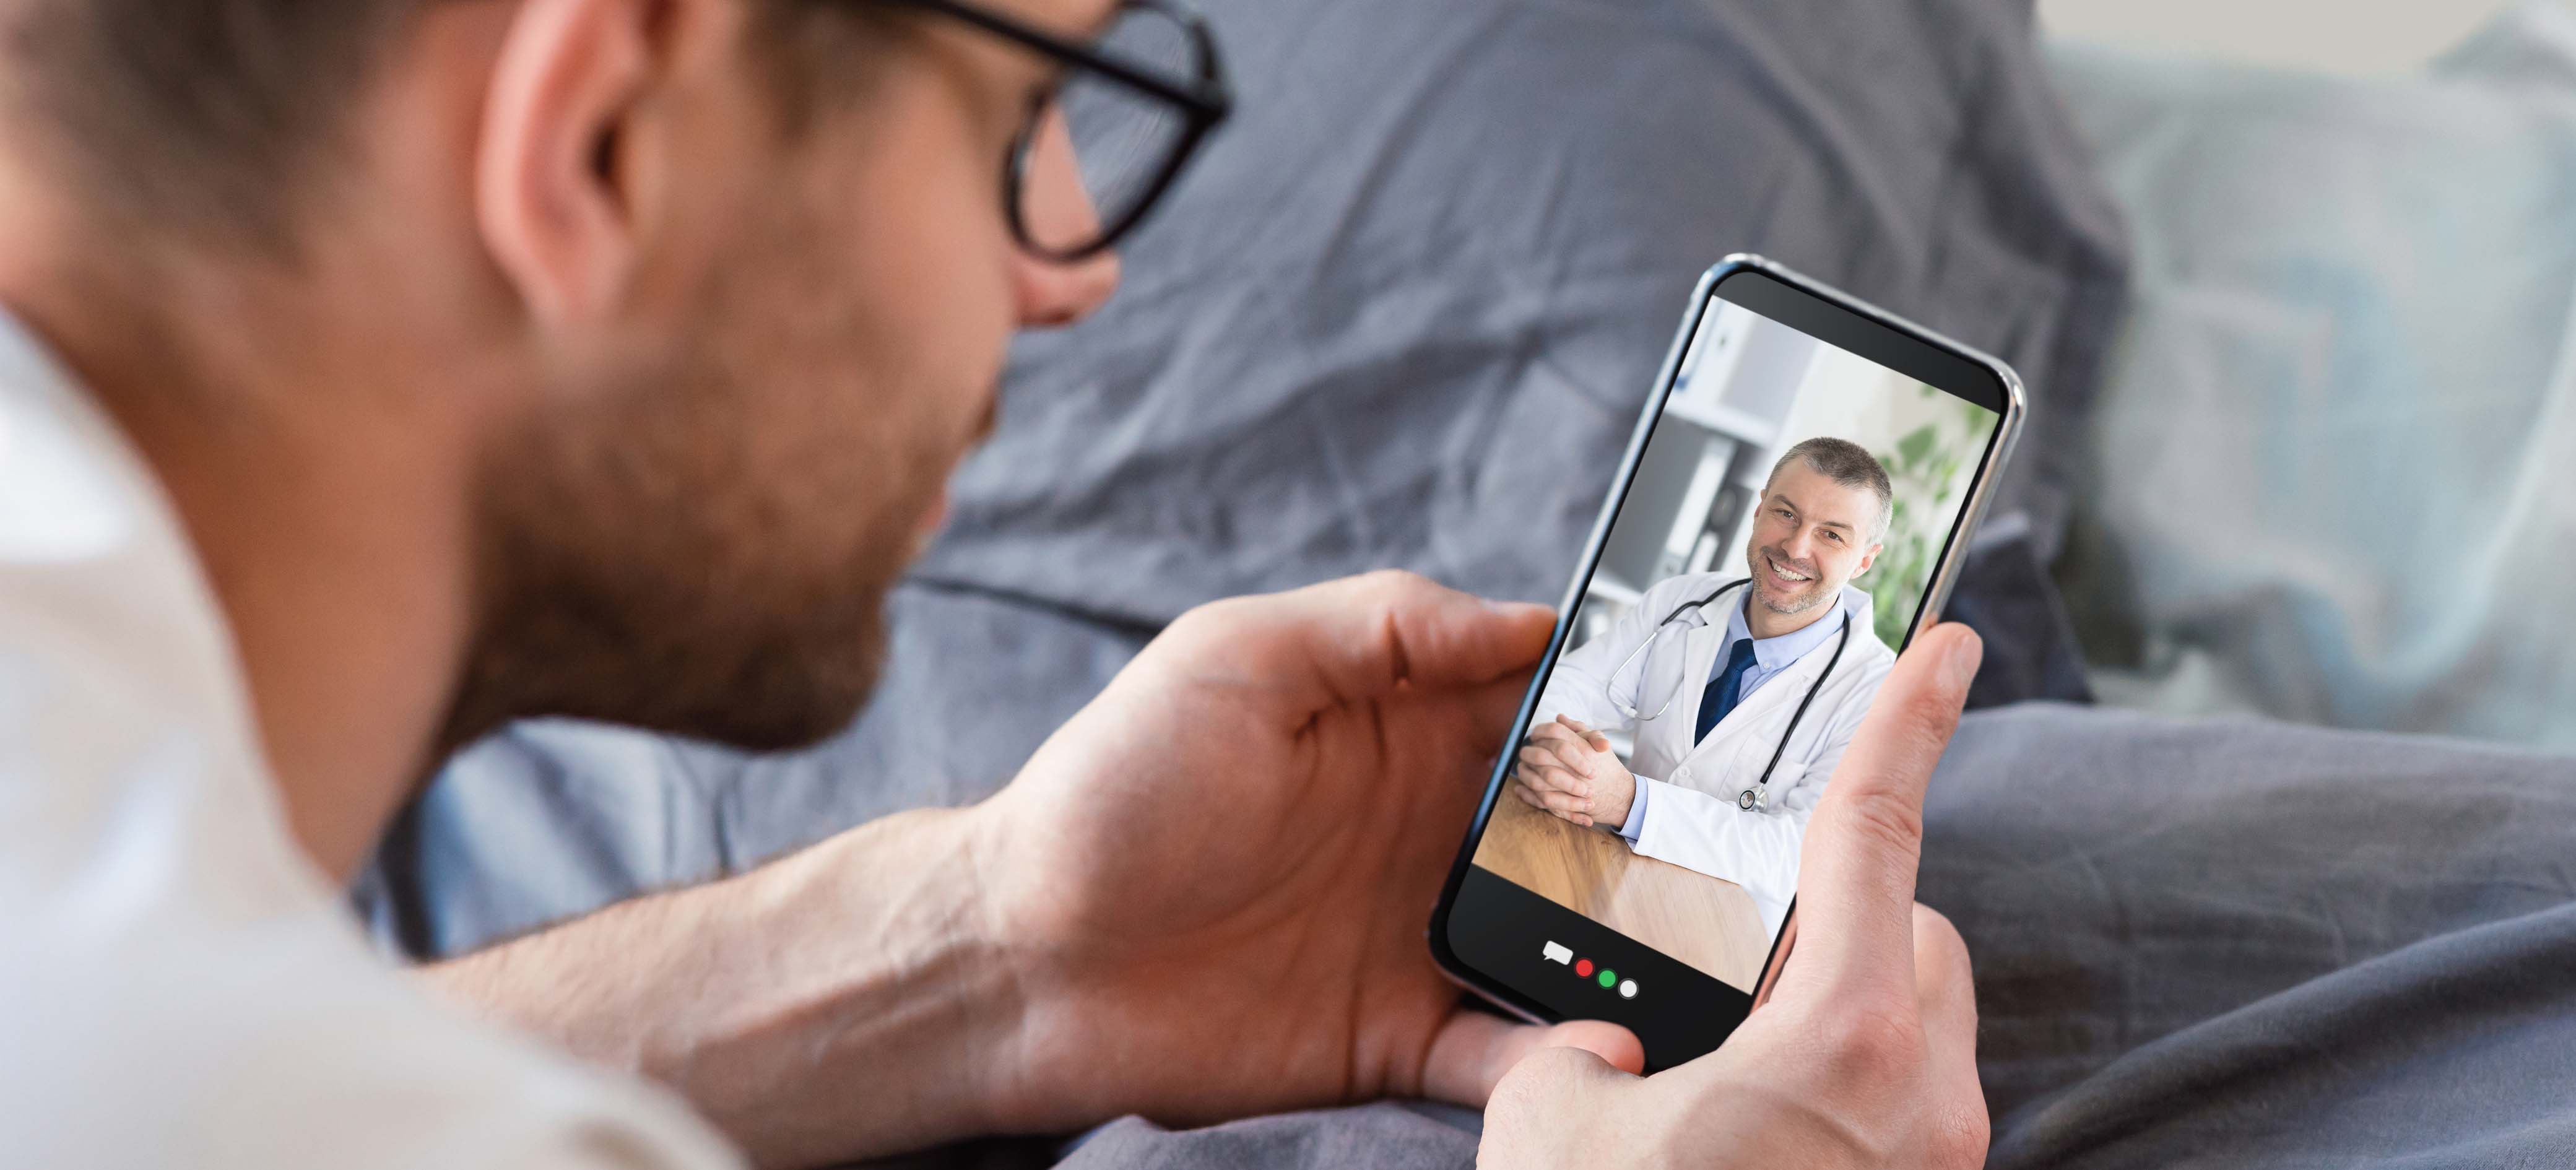 Man having a virtual visit with his doctor on a smartphone